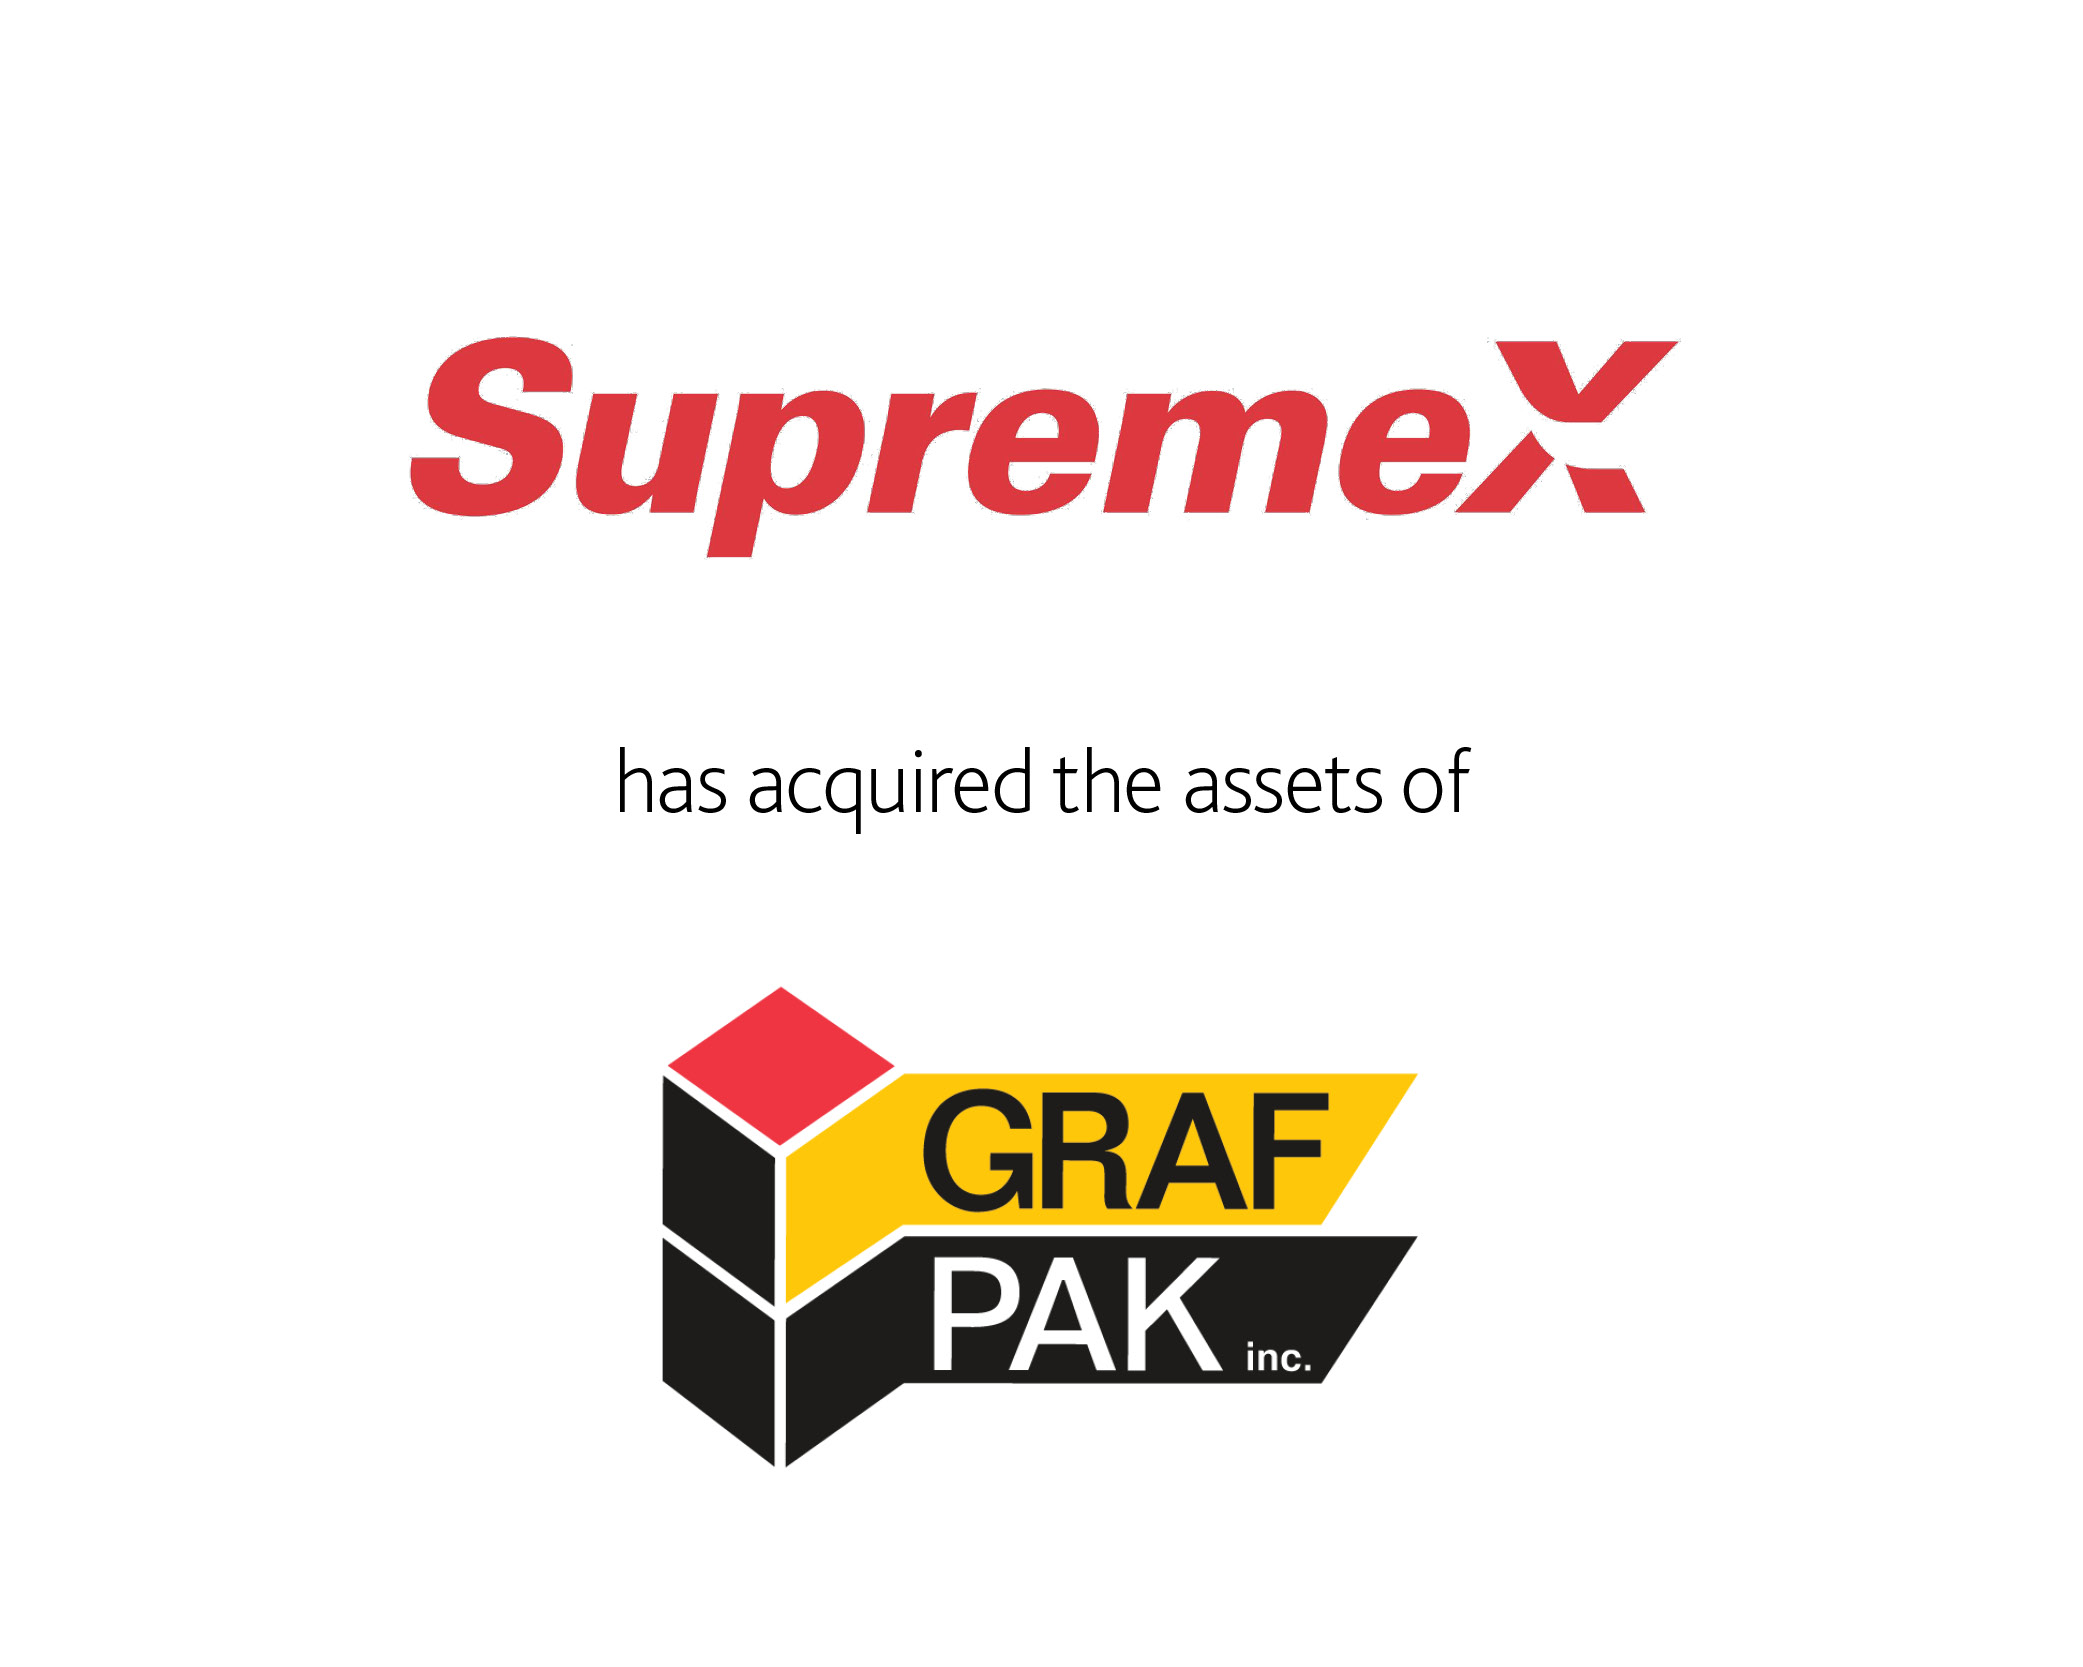 Supreme X has acquired the assets of Graf Pak